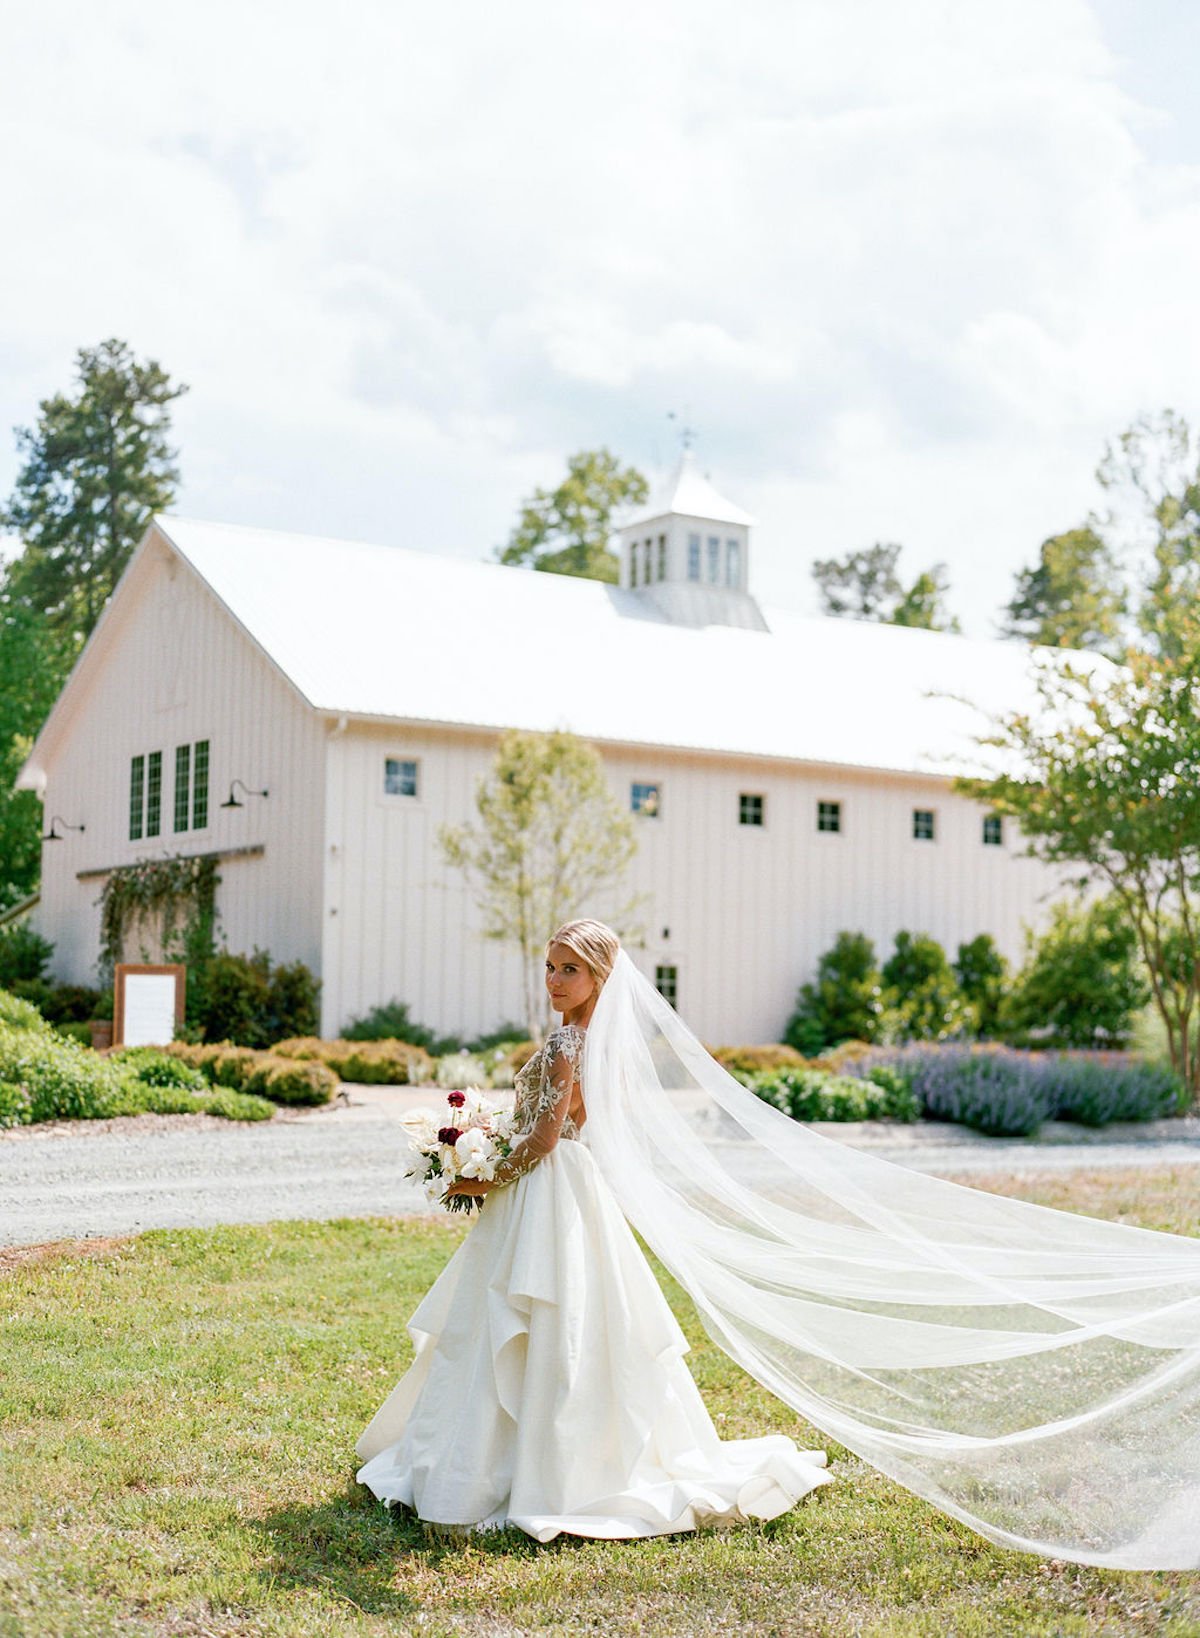 Hayley Paige bridal gown